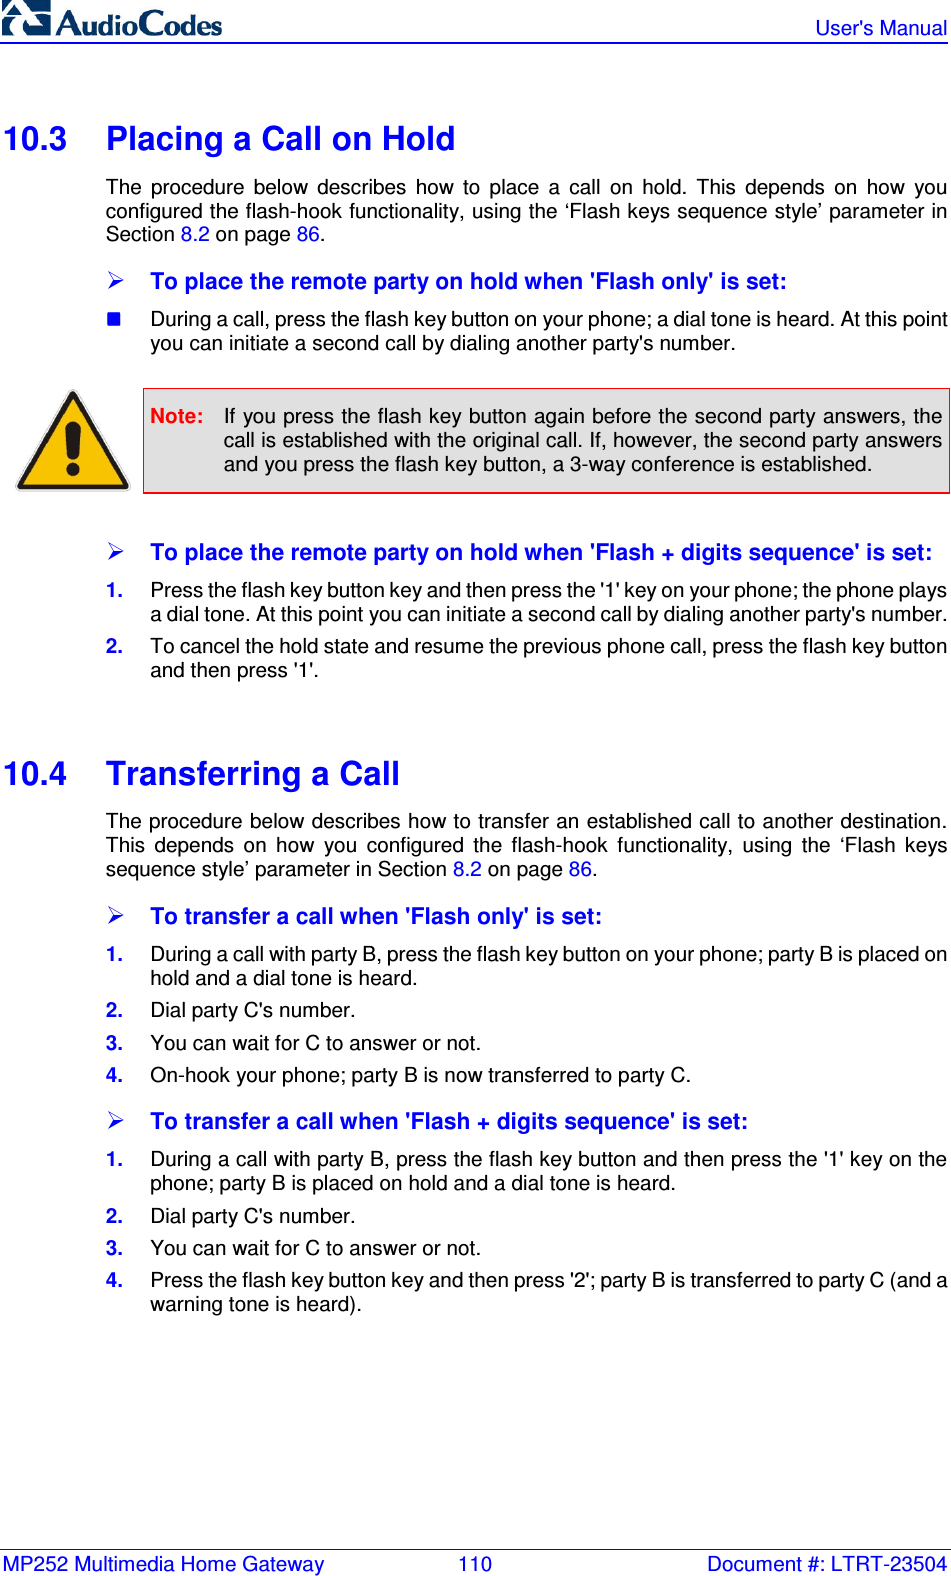 MP252 Multimedia Home Gateway  110  Document #: LTRT-23504   User&apos;s Manual  10.3  Placing a Call on Hold The  procedure  below  describes  how  to  place  a  call  on  hold.  This  depends  on  how  you configured the flash-hook functionality, using the ‘Flash keys sequence style’ parameter in Section 8.2 on page 86.  To place the remote party on hold when &apos;Flash only&apos; is set:  During a call, press the flash key button on your phone; a dial tone is heard. At this point you can initiate a second call by dialing another party&apos;s number.   Note:  If you press the flash key button again before the second party answers, the call is established with the original call. If, however, the second party answers and you press the flash key button, a 3-way conference is established.   To place the remote party on hold when &apos;Flash + digits sequence&apos; is set: 1.  Press the flash key button key and then press the &apos;1&apos; key on your phone; the phone plays a dial tone. At this point you can initiate a second call by dialing another party&apos;s number. 2.  To cancel the hold state and resume the previous phone call, press the flash key button and then press &apos;1&apos;.   10.4  Transferring a Call The procedure below describes how to transfer an established call to another destination. This  depends  on  how  you  configured  the  flash-hook  functionality,  using  the  ‘Flash  keys sequence style’ parameter in Section 8.2 on page 86.  To transfer a call when &apos;Flash only&apos; is set: 1.  During a call with party B, press the flash key button on your phone; party B is placed on hold and a dial tone is heard. 2.  Dial party C&apos;s number. 3.  You can wait for C to answer or not. 4.  On-hook your phone; party B is now transferred to party C.  To transfer a call when &apos;Flash + digits sequence&apos; is set: 1.  During a call with party B, press the flash key button and then press the &apos;1&apos; key on the phone; party B is placed on hold and a dial tone is heard. 2.  Dial party C&apos;s number. 3.  You can wait for C to answer or not. 4.  Press the flash key button key and then press &apos;2&apos;; party B is transferred to party C (and a warning tone is heard).   